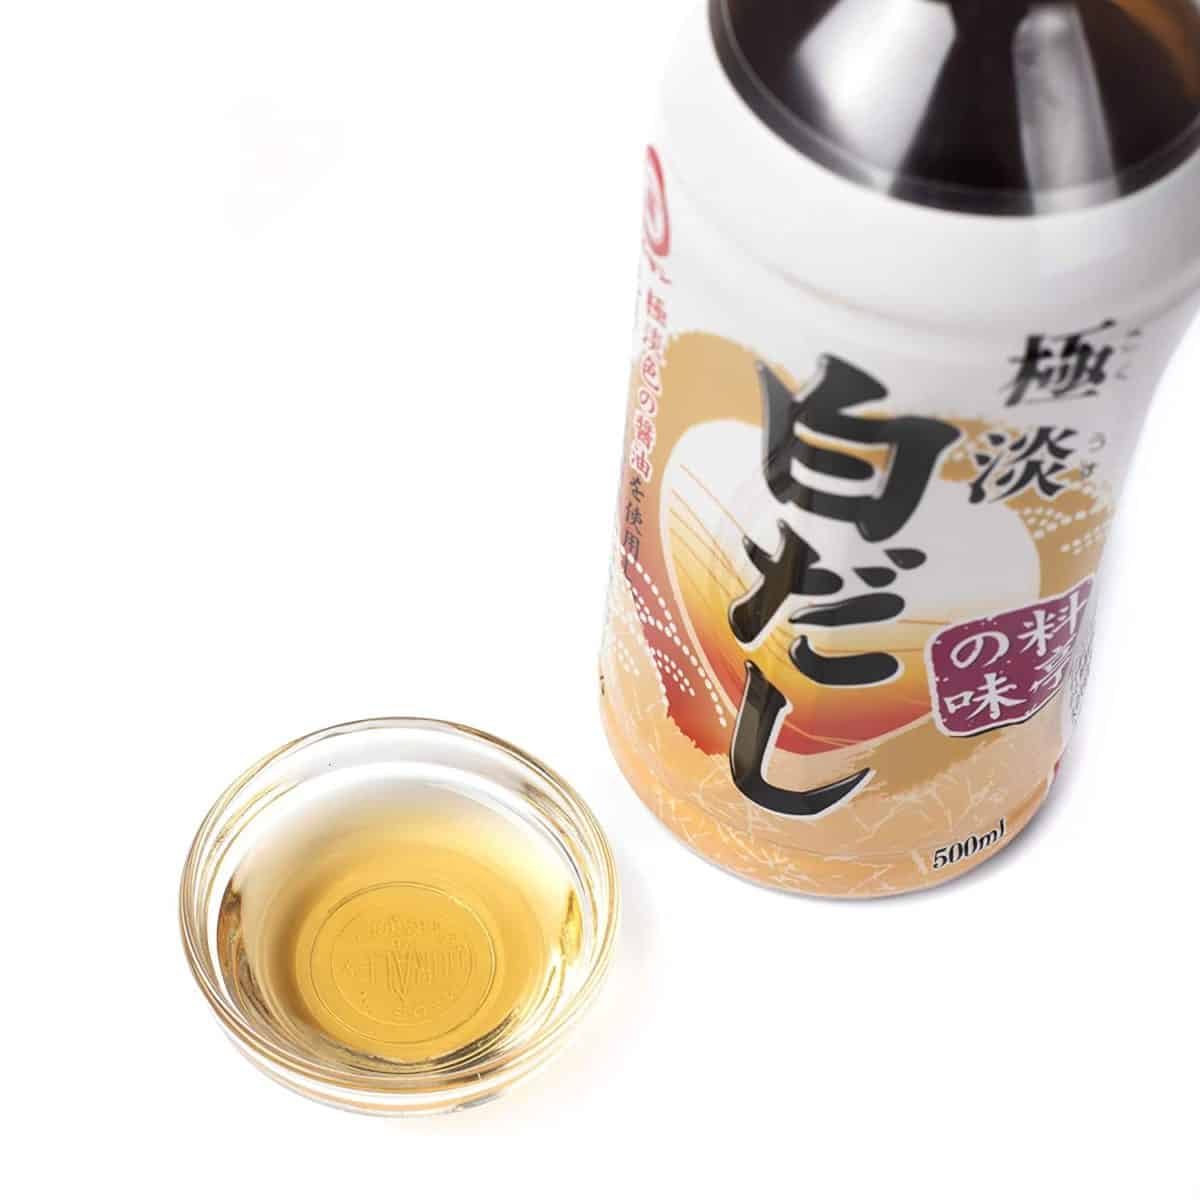 Shiro dashi concentrate in a bottle